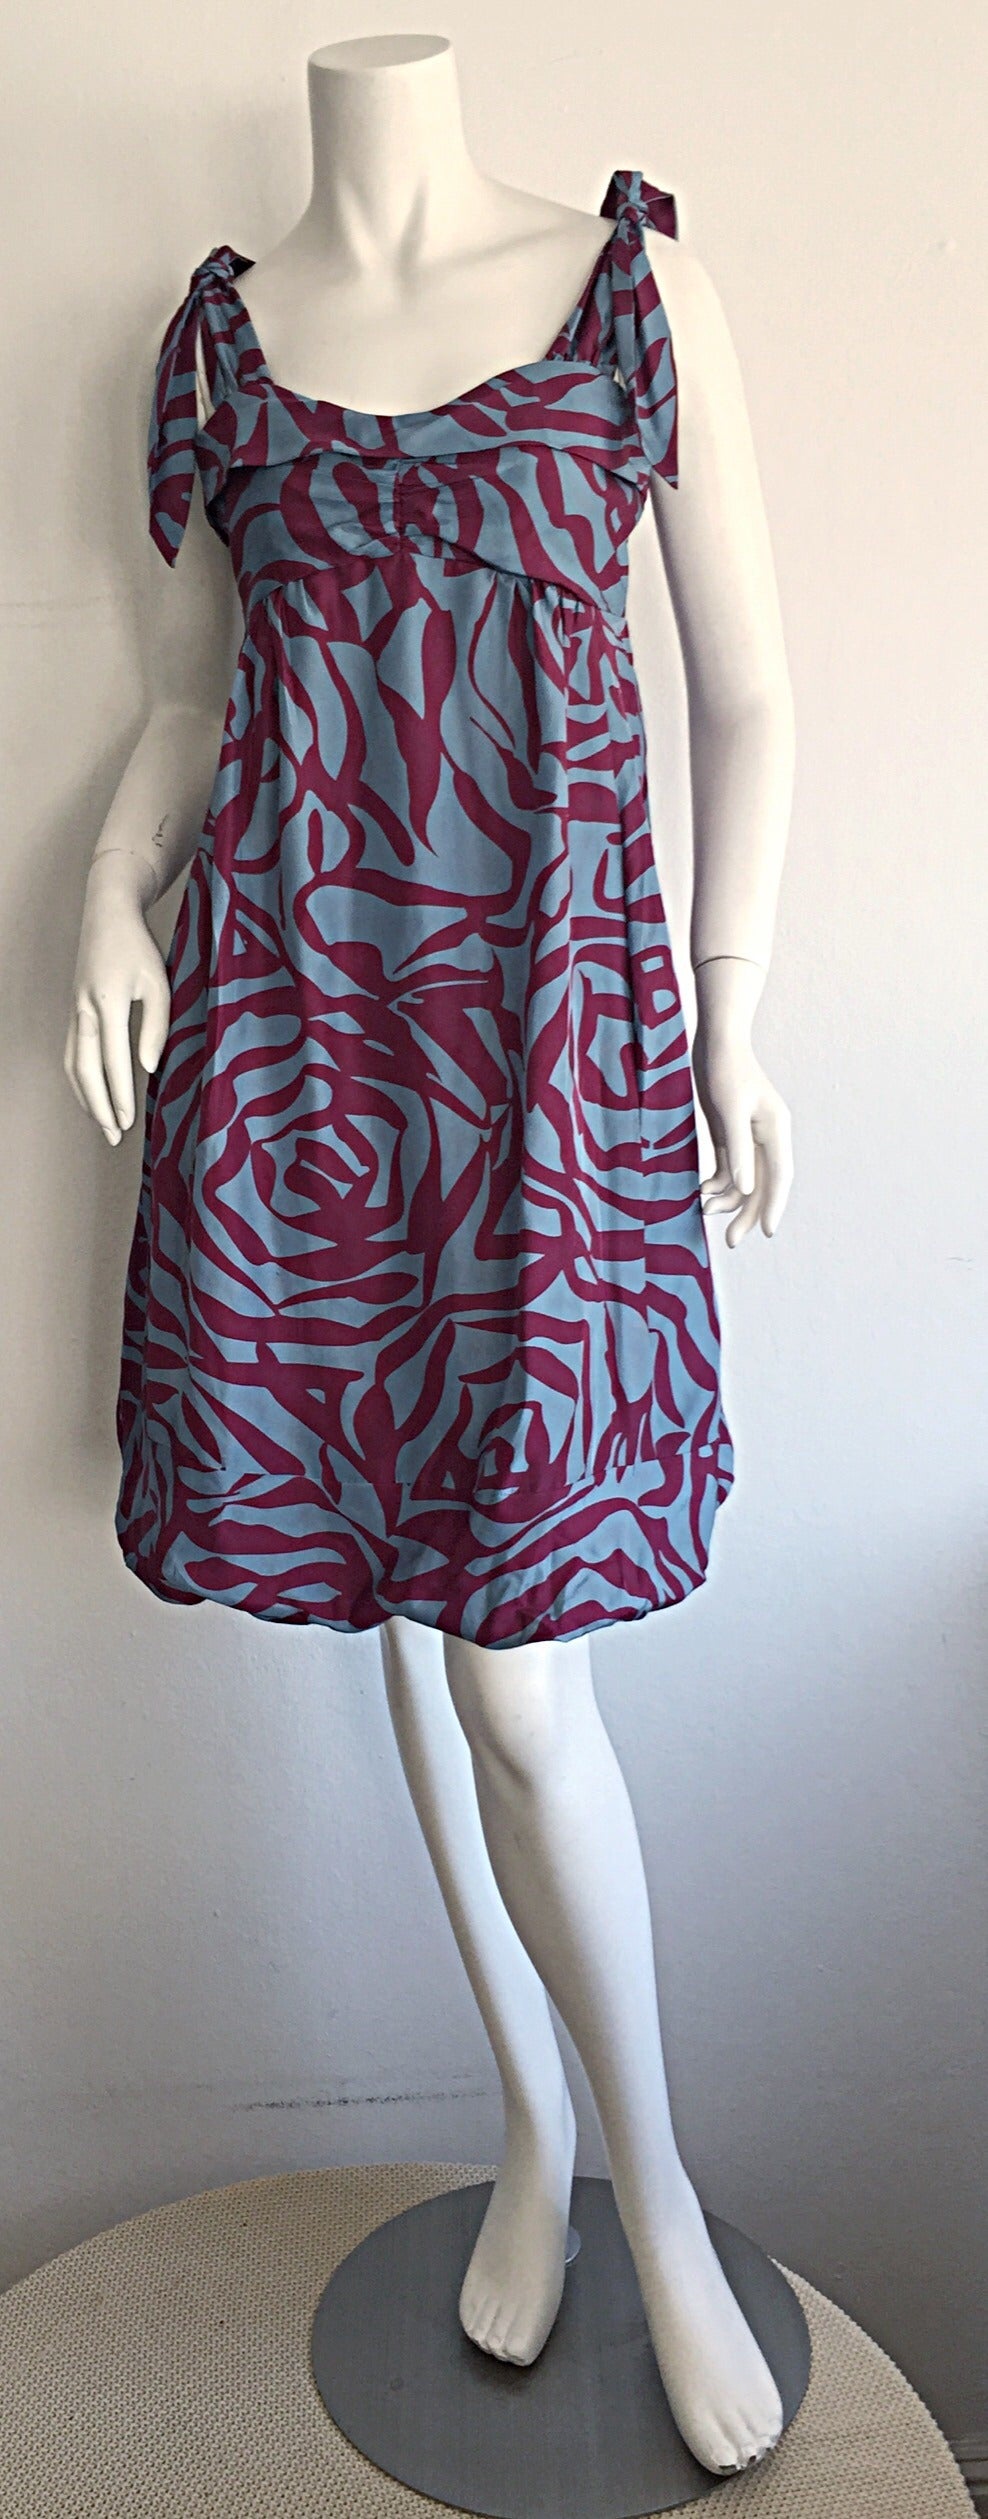 Wonderful Marc Jacobs blue silk bubble dress! Features unique 3-D print of a rose, that looks like zebra at first glance. Chic functional ties at shoulders, with a playful bubble hem. Flattering shelf bust. Great for day or night. Looks good with